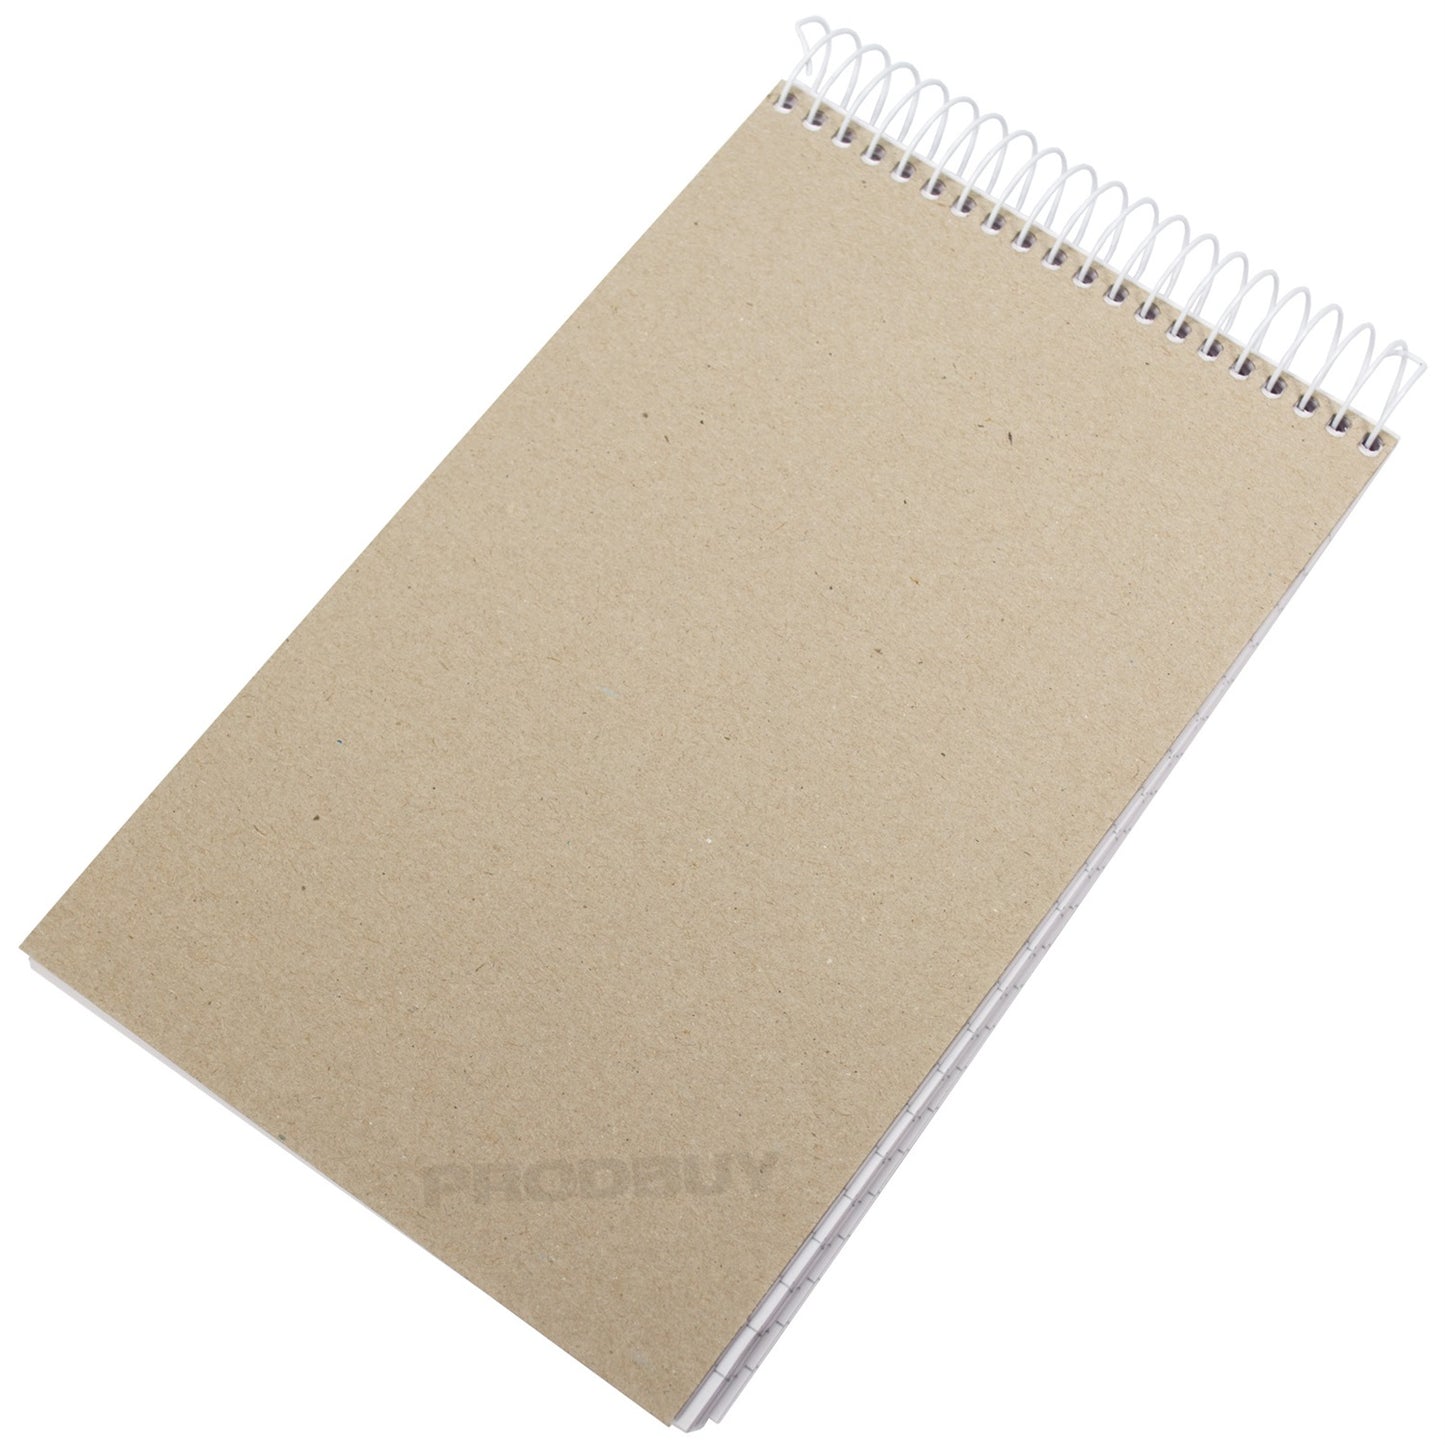 Set of 5 Spiral Bound Shorthand Pads Notebooks with 150 Lined Sheets